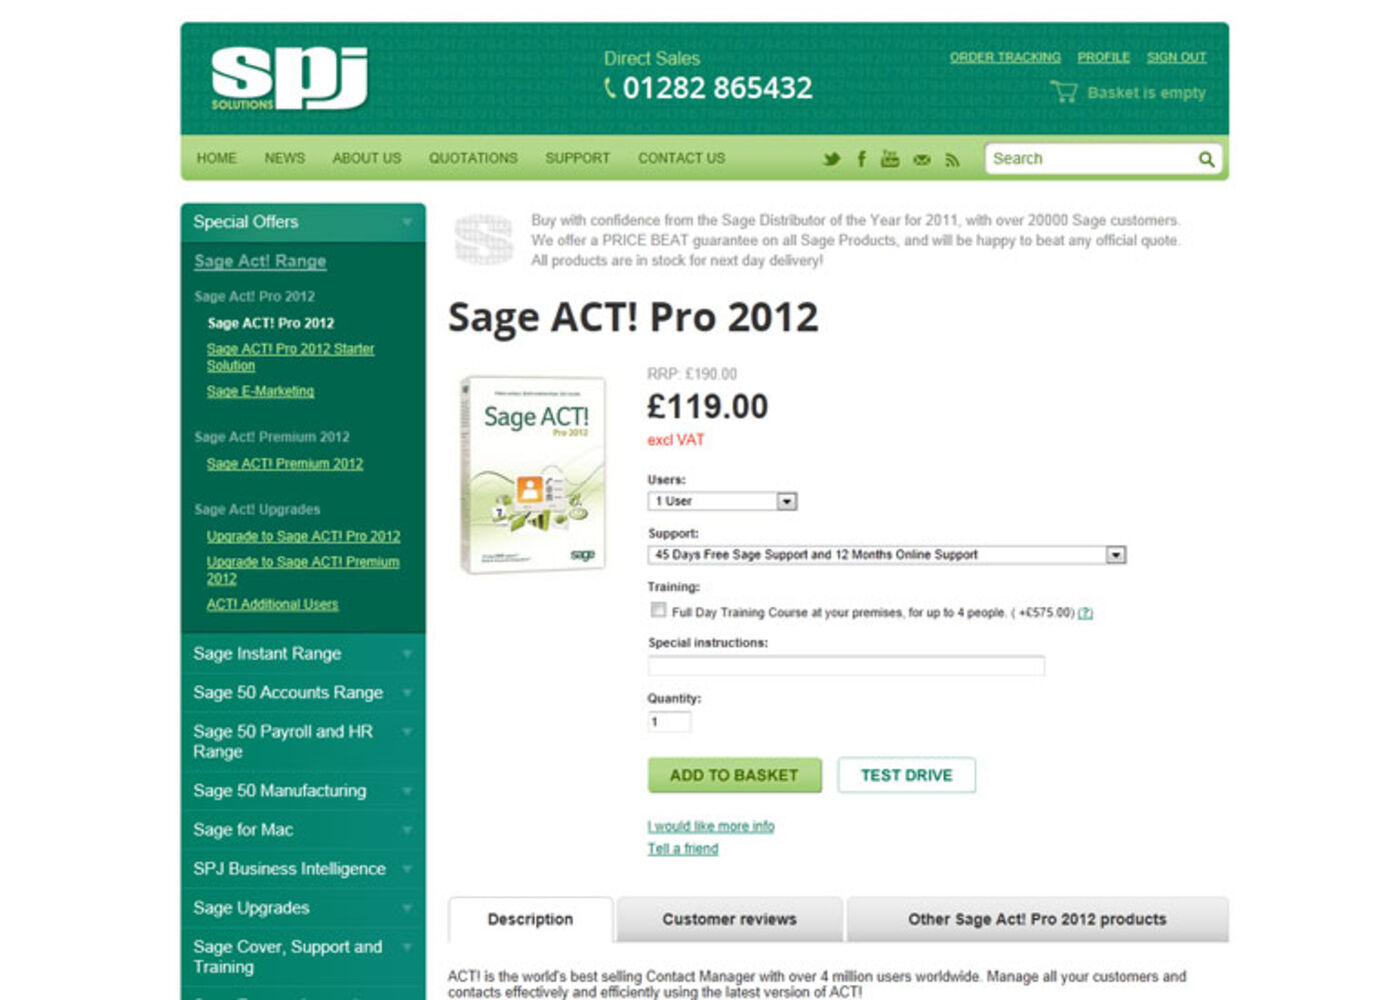 SPJ Solutions (2012) Product page